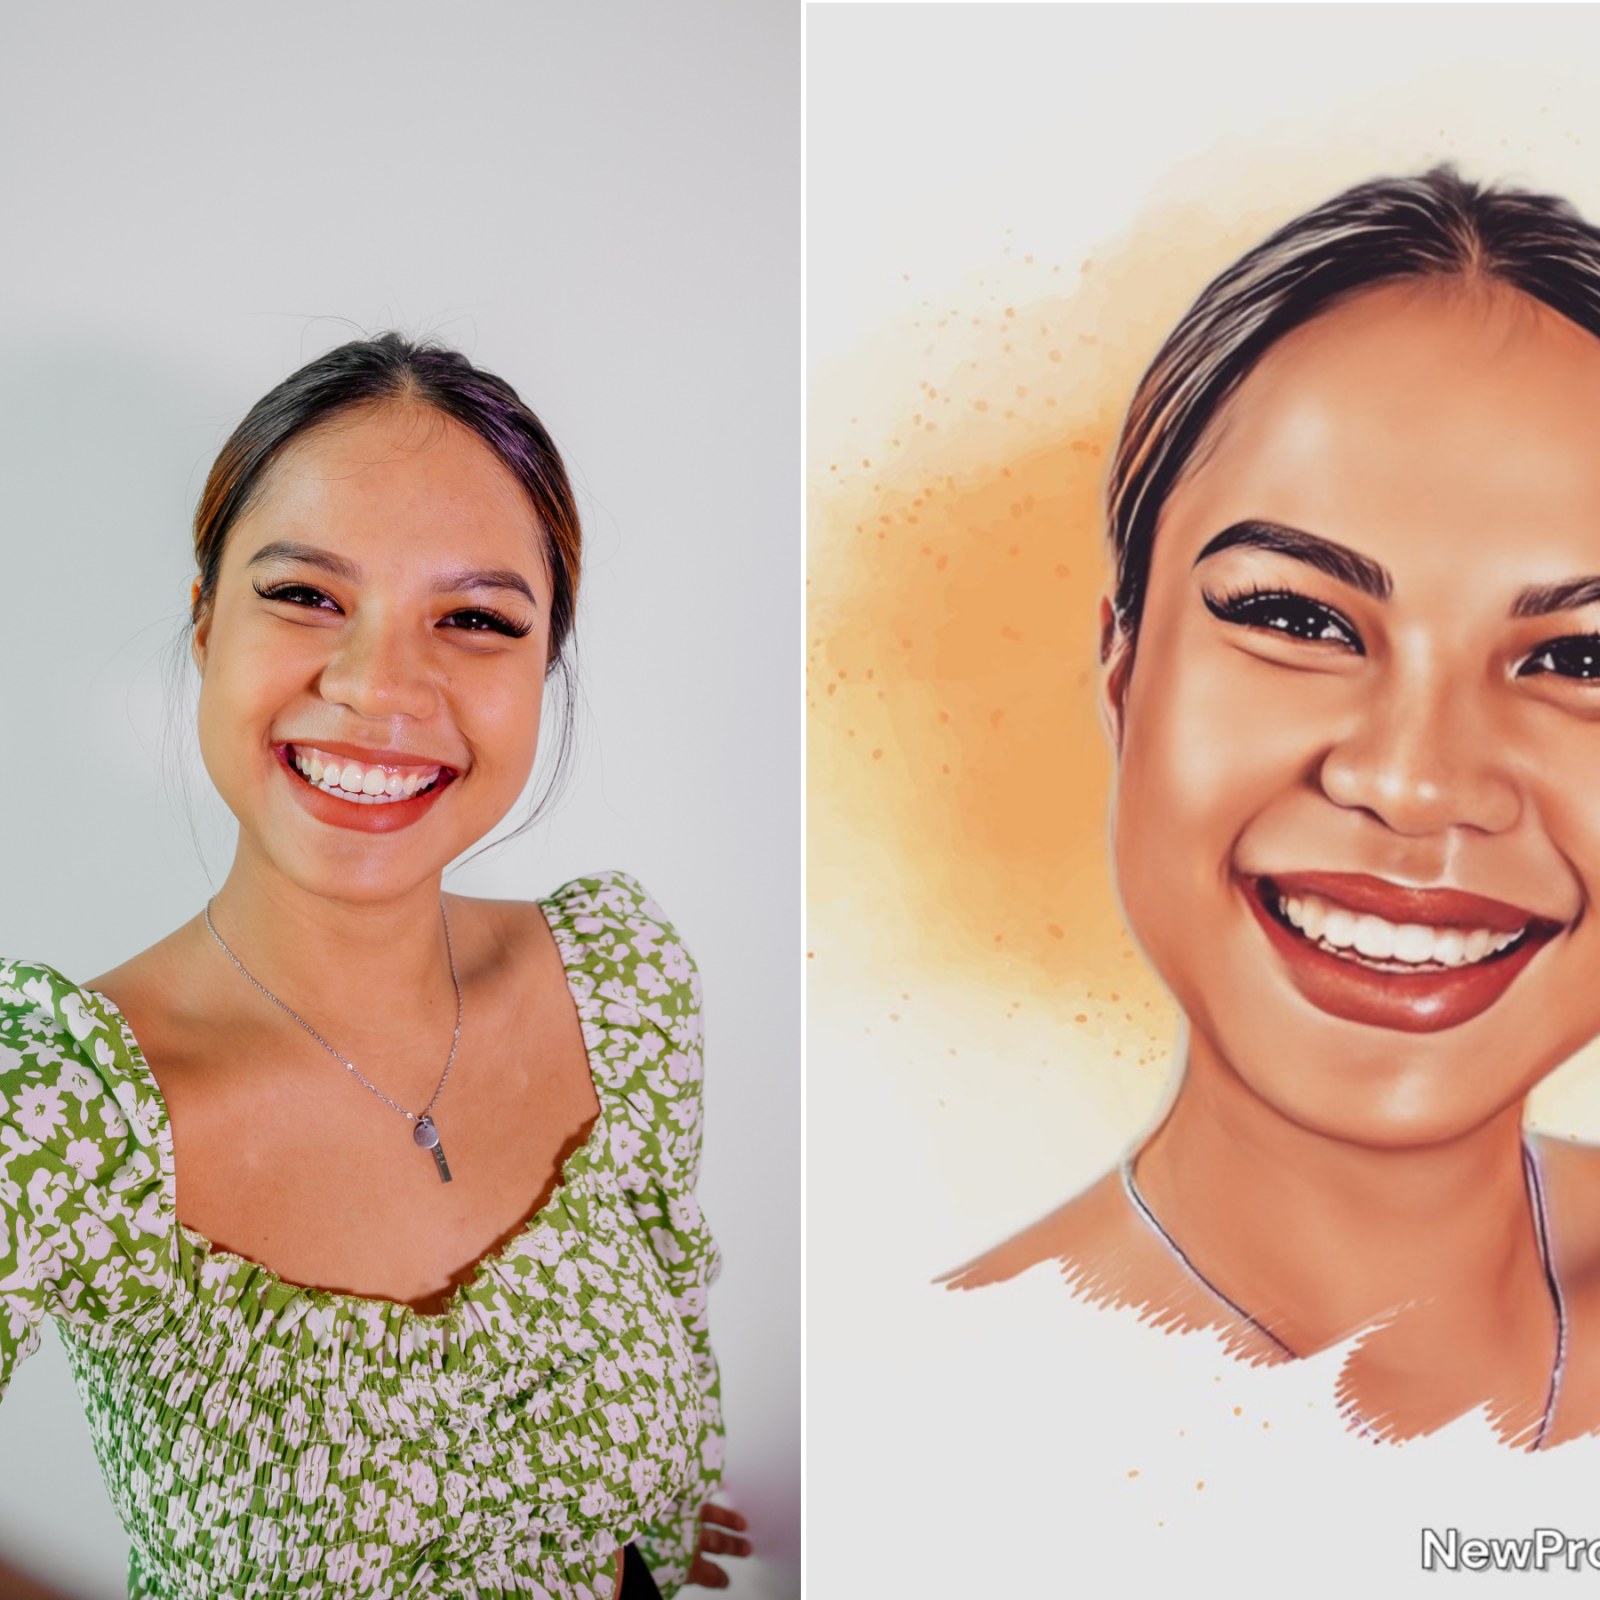 Painting Selfie Avatars Takes Internet by Storm, Here's How To Get Yours